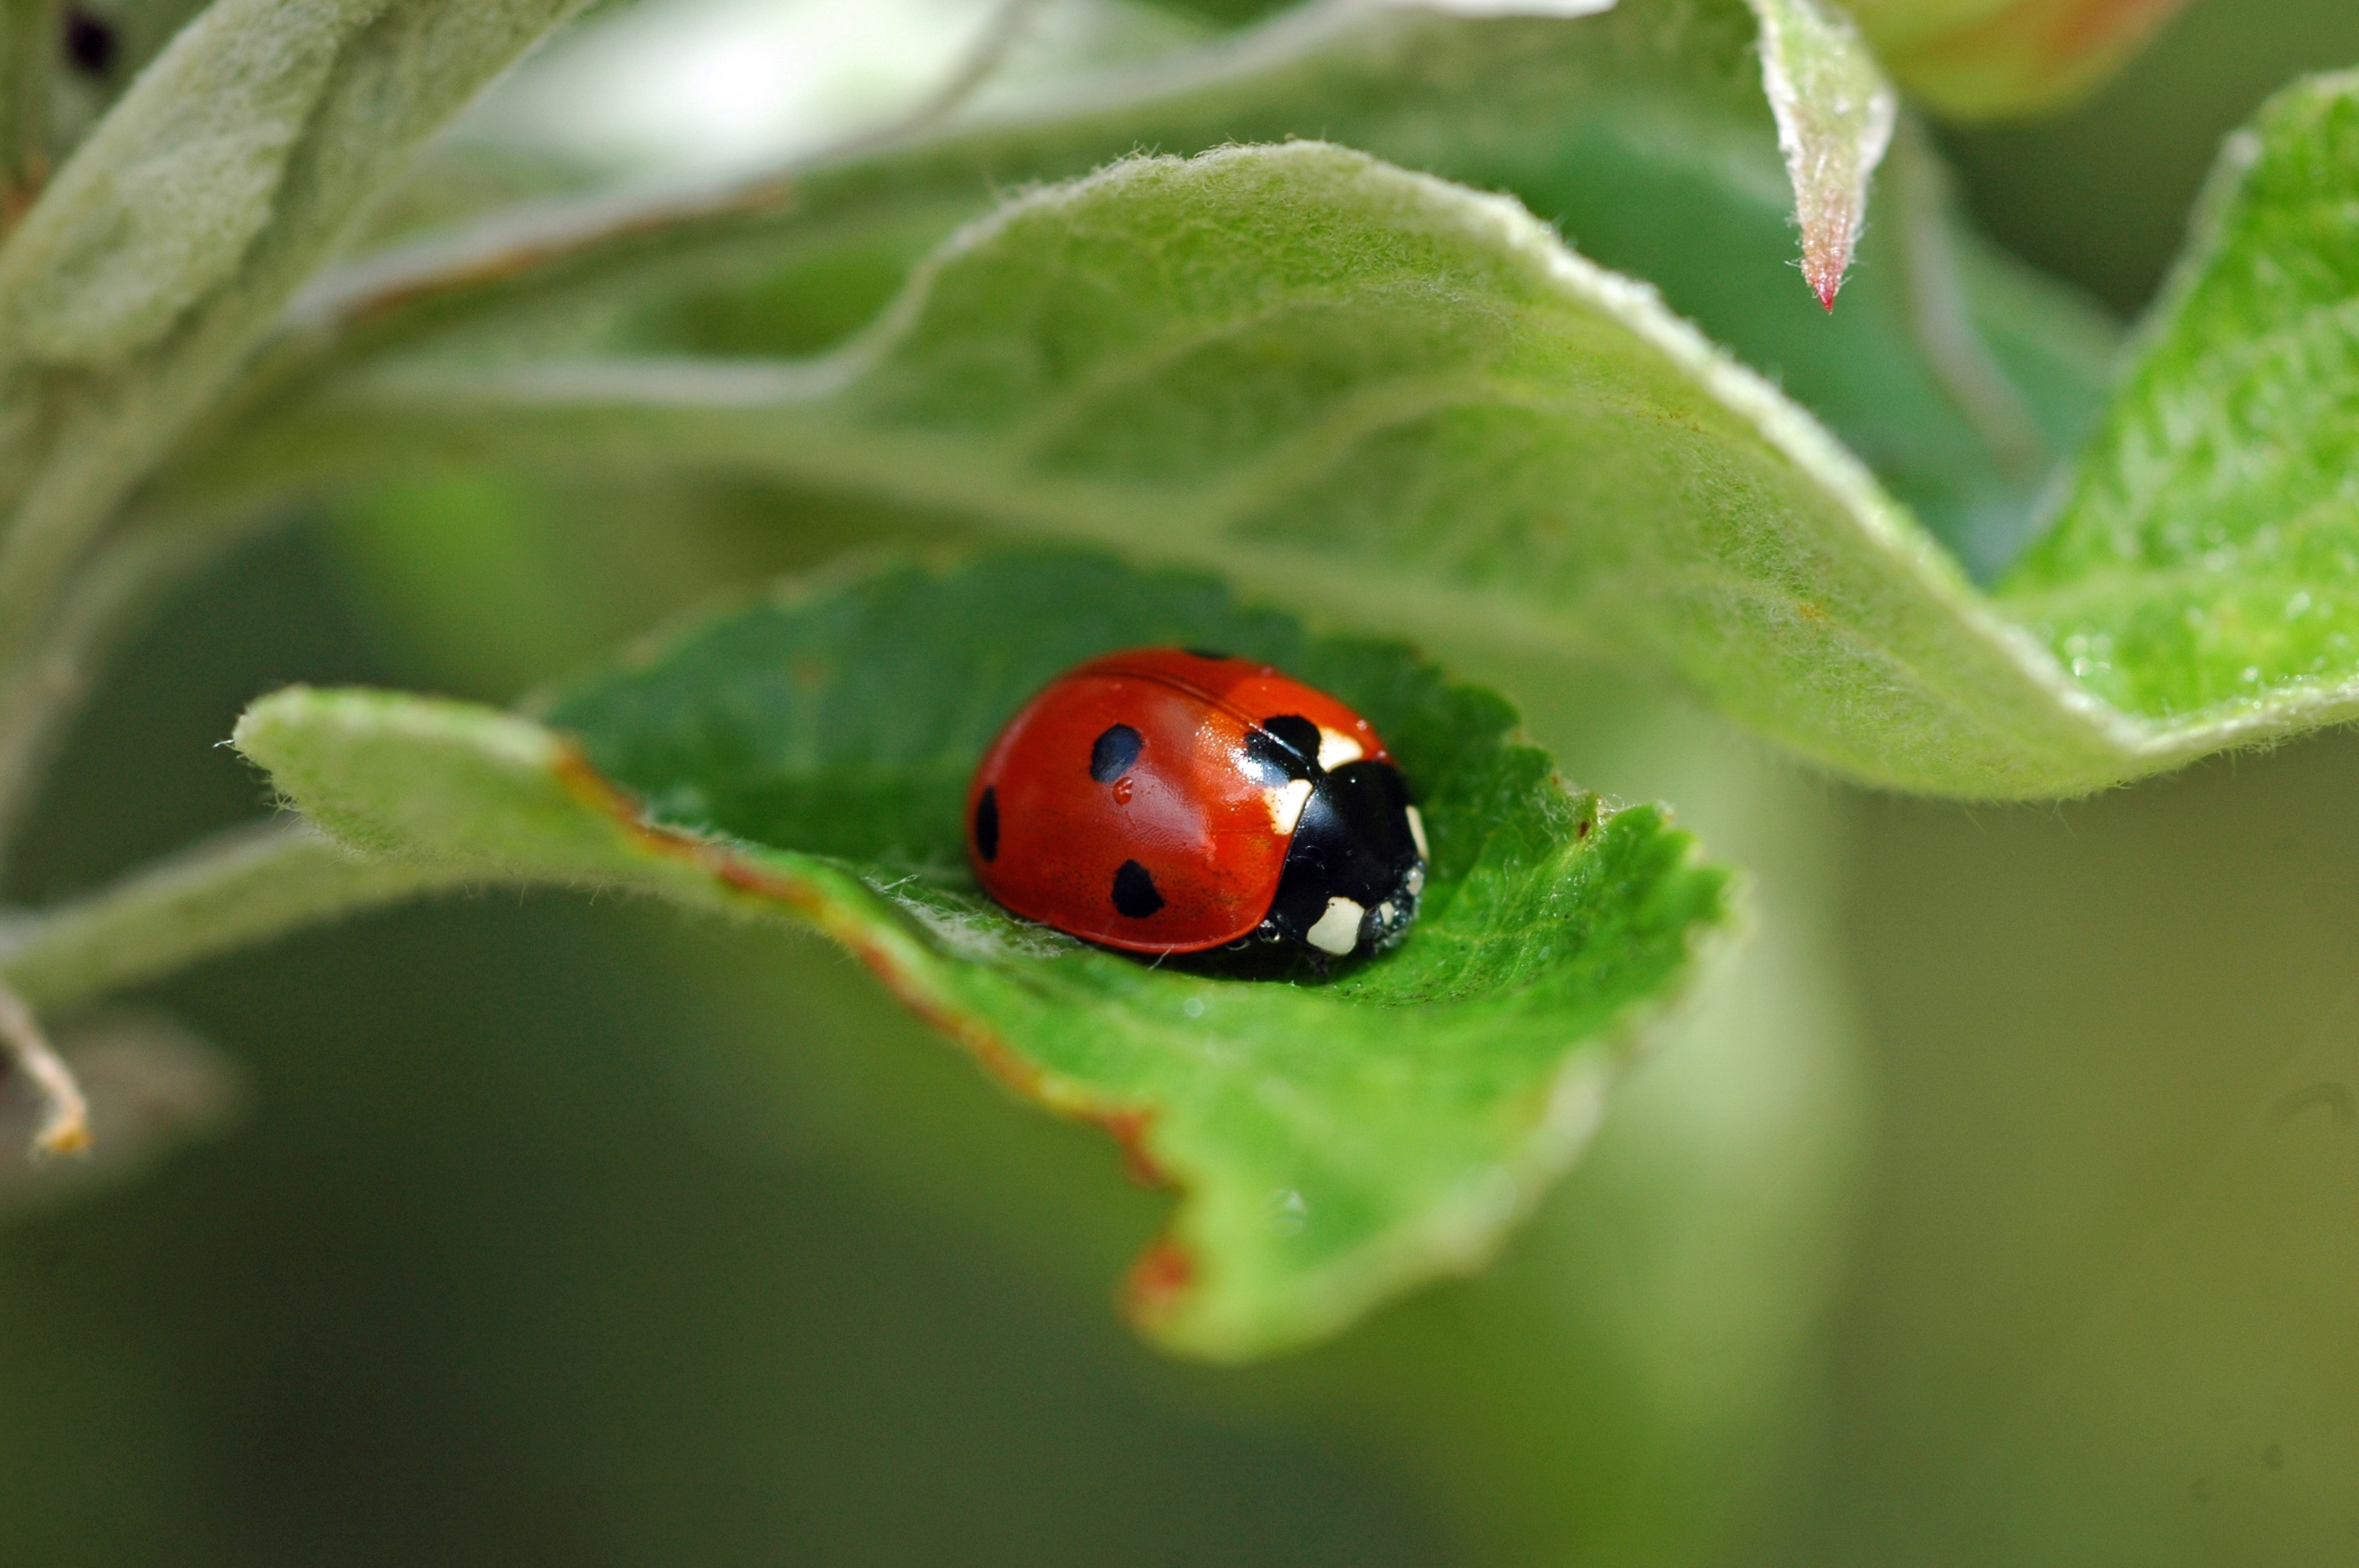 6 spotted red and black ladybug